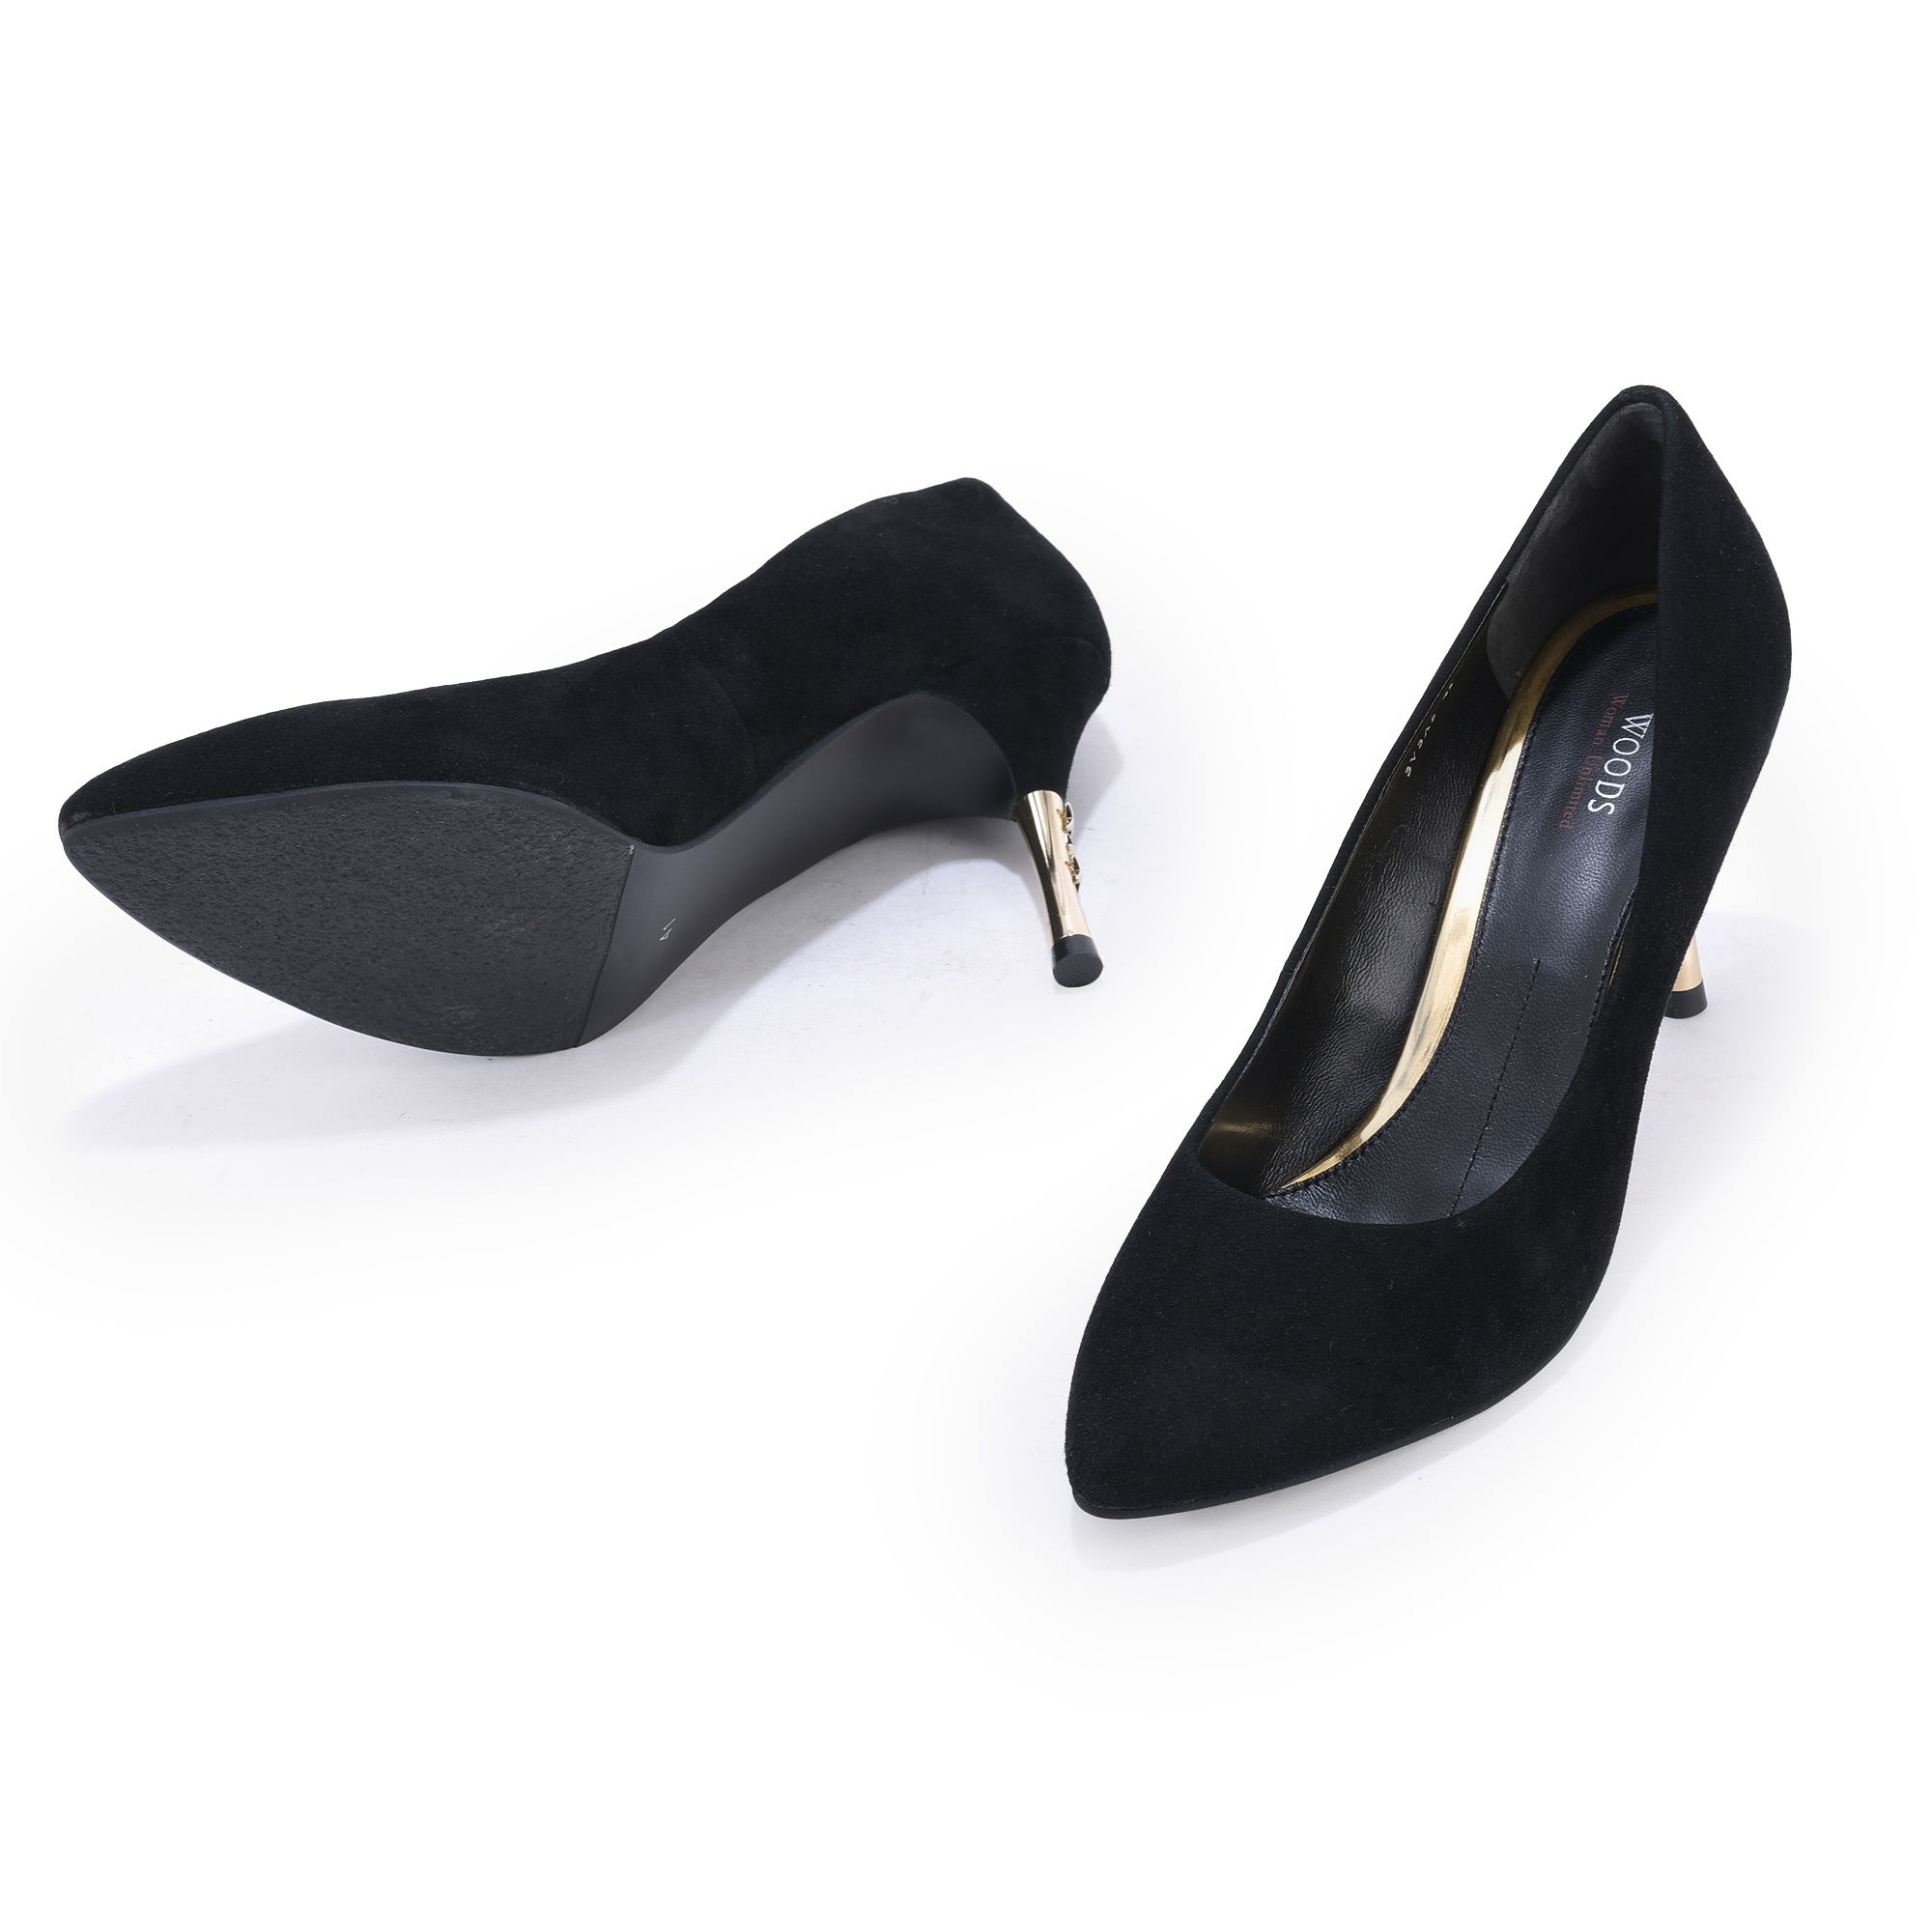 BLACK pointed toe pumps